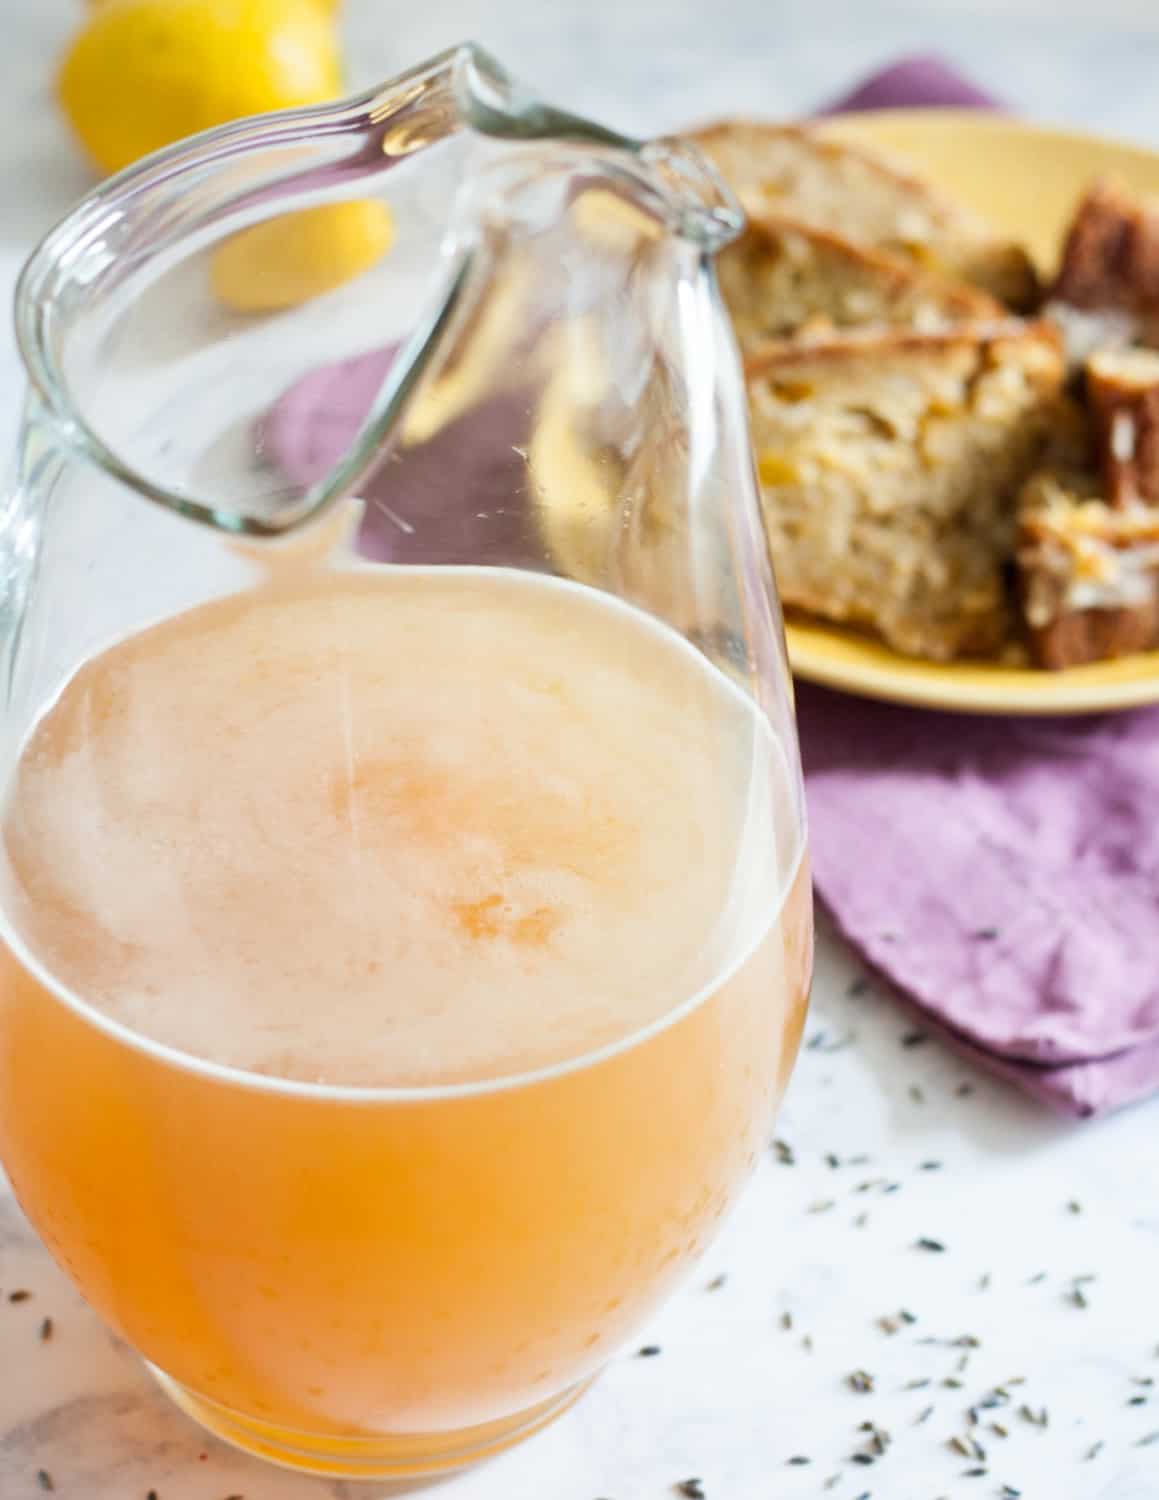 Sweeten your summer lemonade with honey, and add a floral flavor with lavender. Honey, lemon, and lavender are a classic flavor combination that comes together beautifully in this raw honey lavender lemonade recipe!  * GoodieGodmother.com